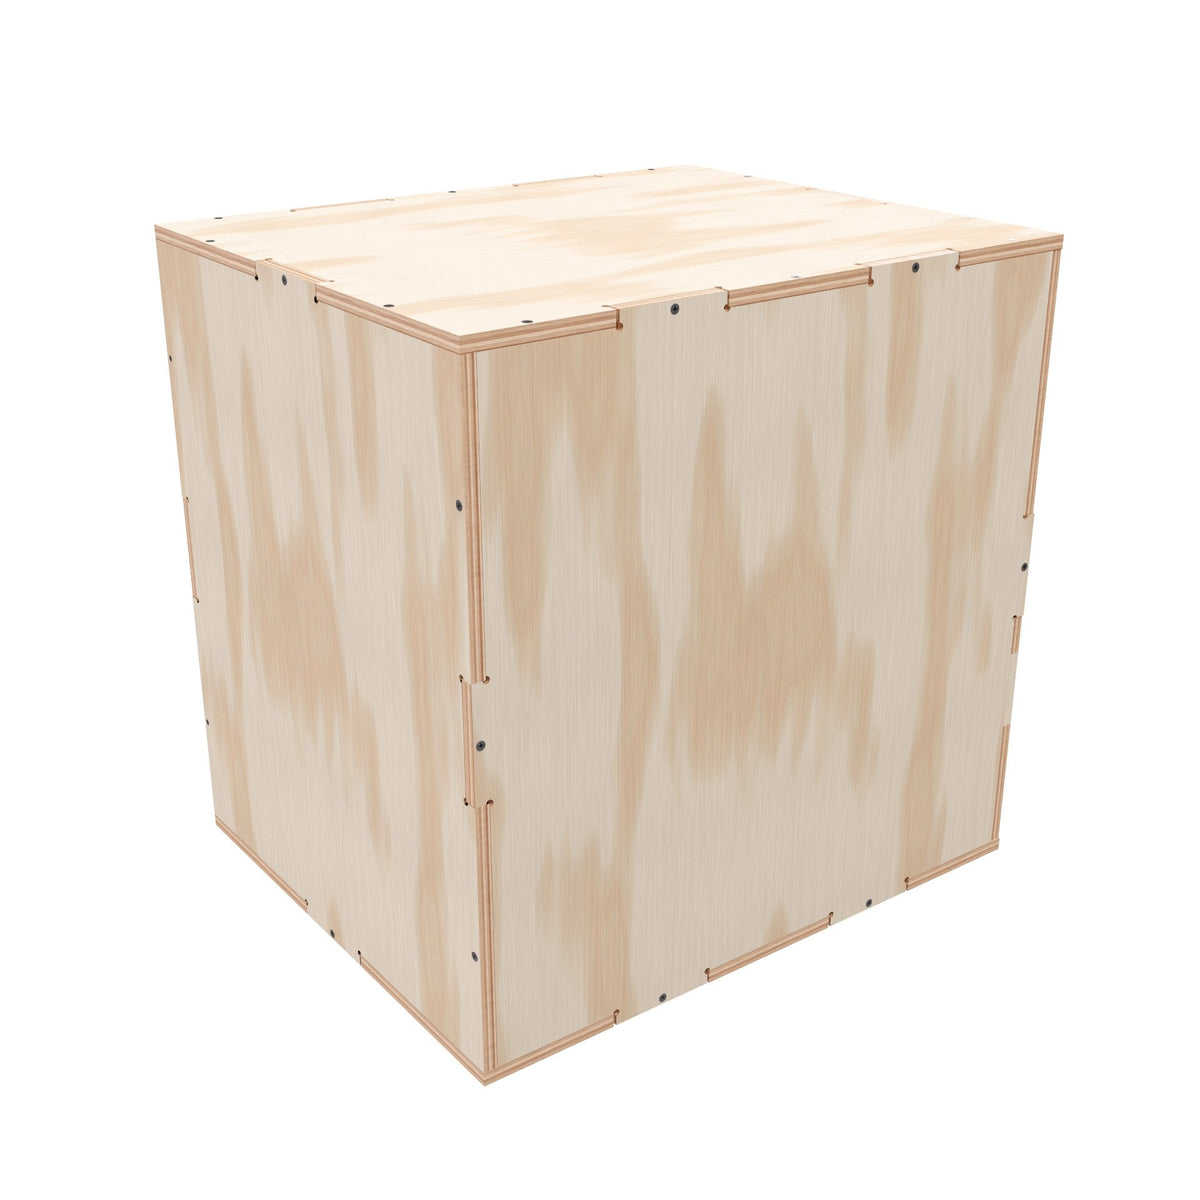 Plywood Shipping Crate 24x20x24